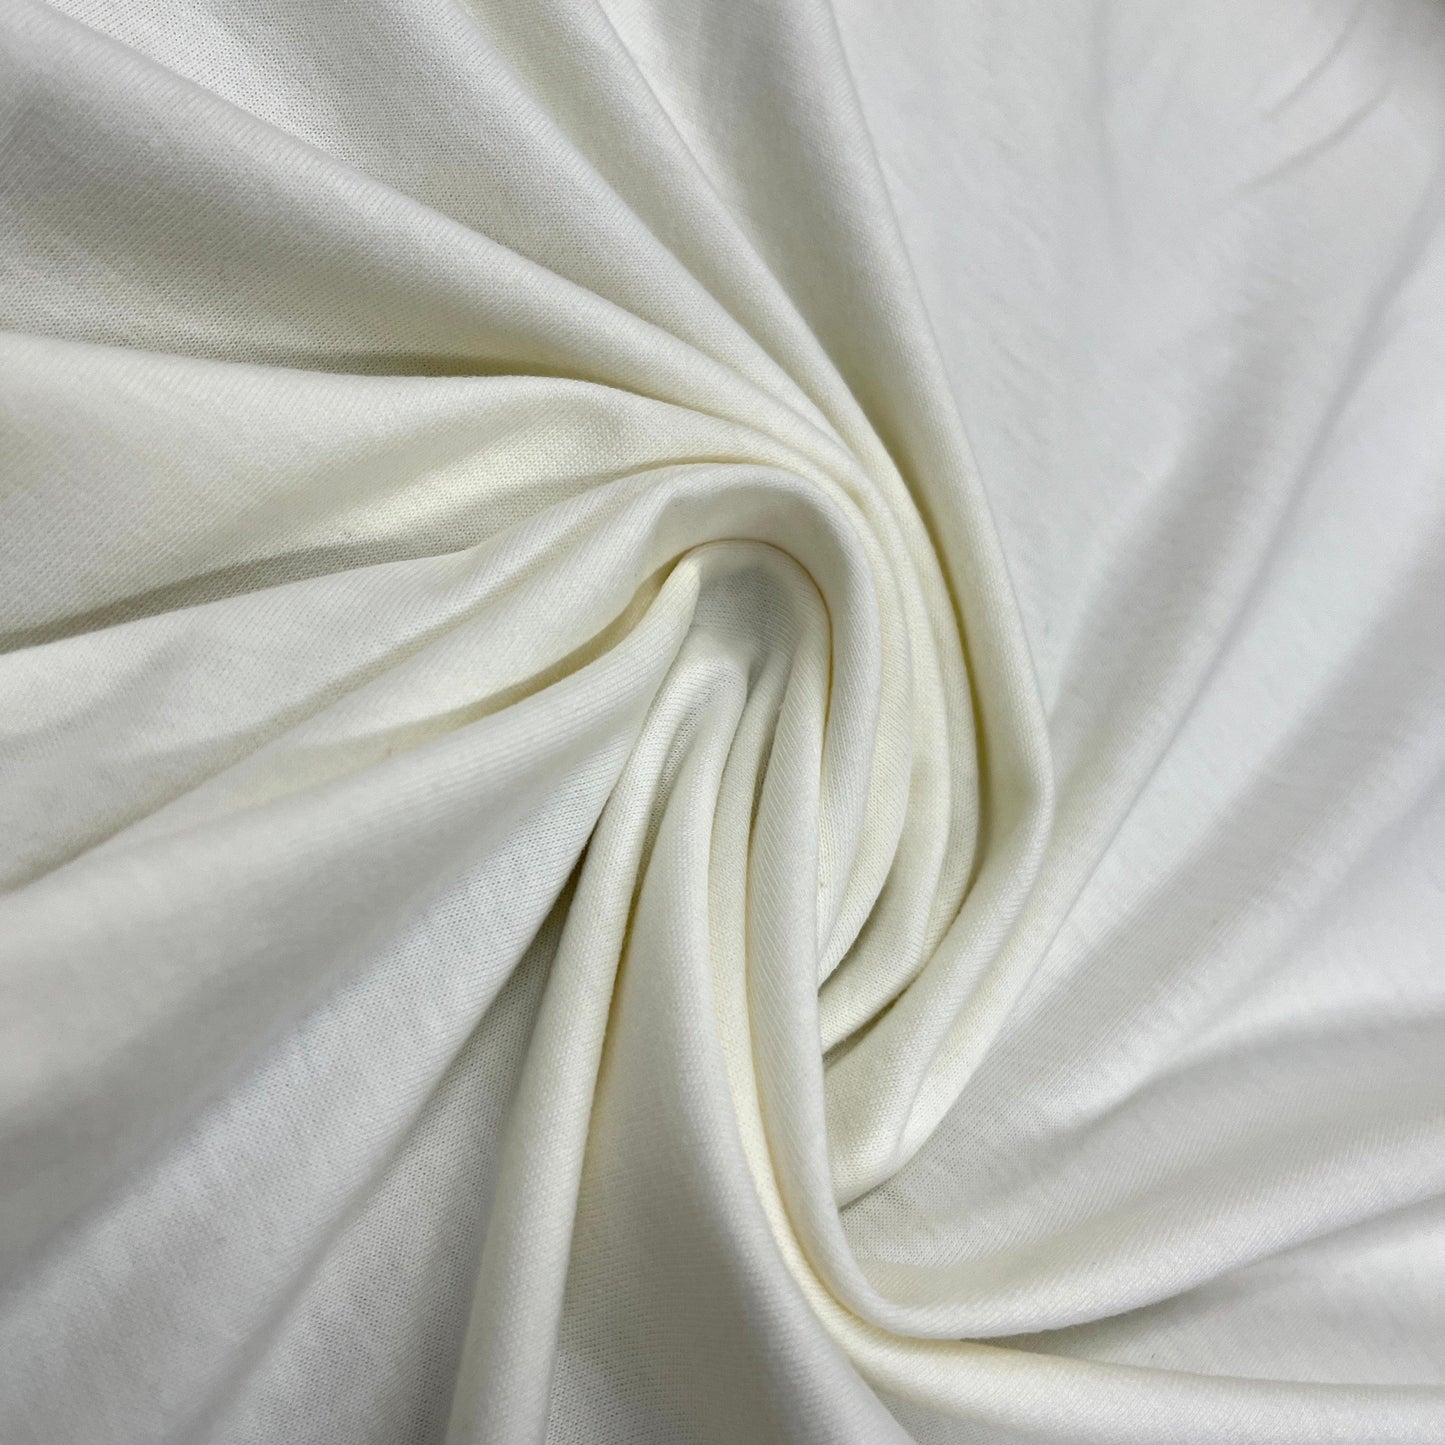 Off-White Organic Cotton Jersey Fabric- 200 GSM - Grown in the USA - Nature's Fabrics